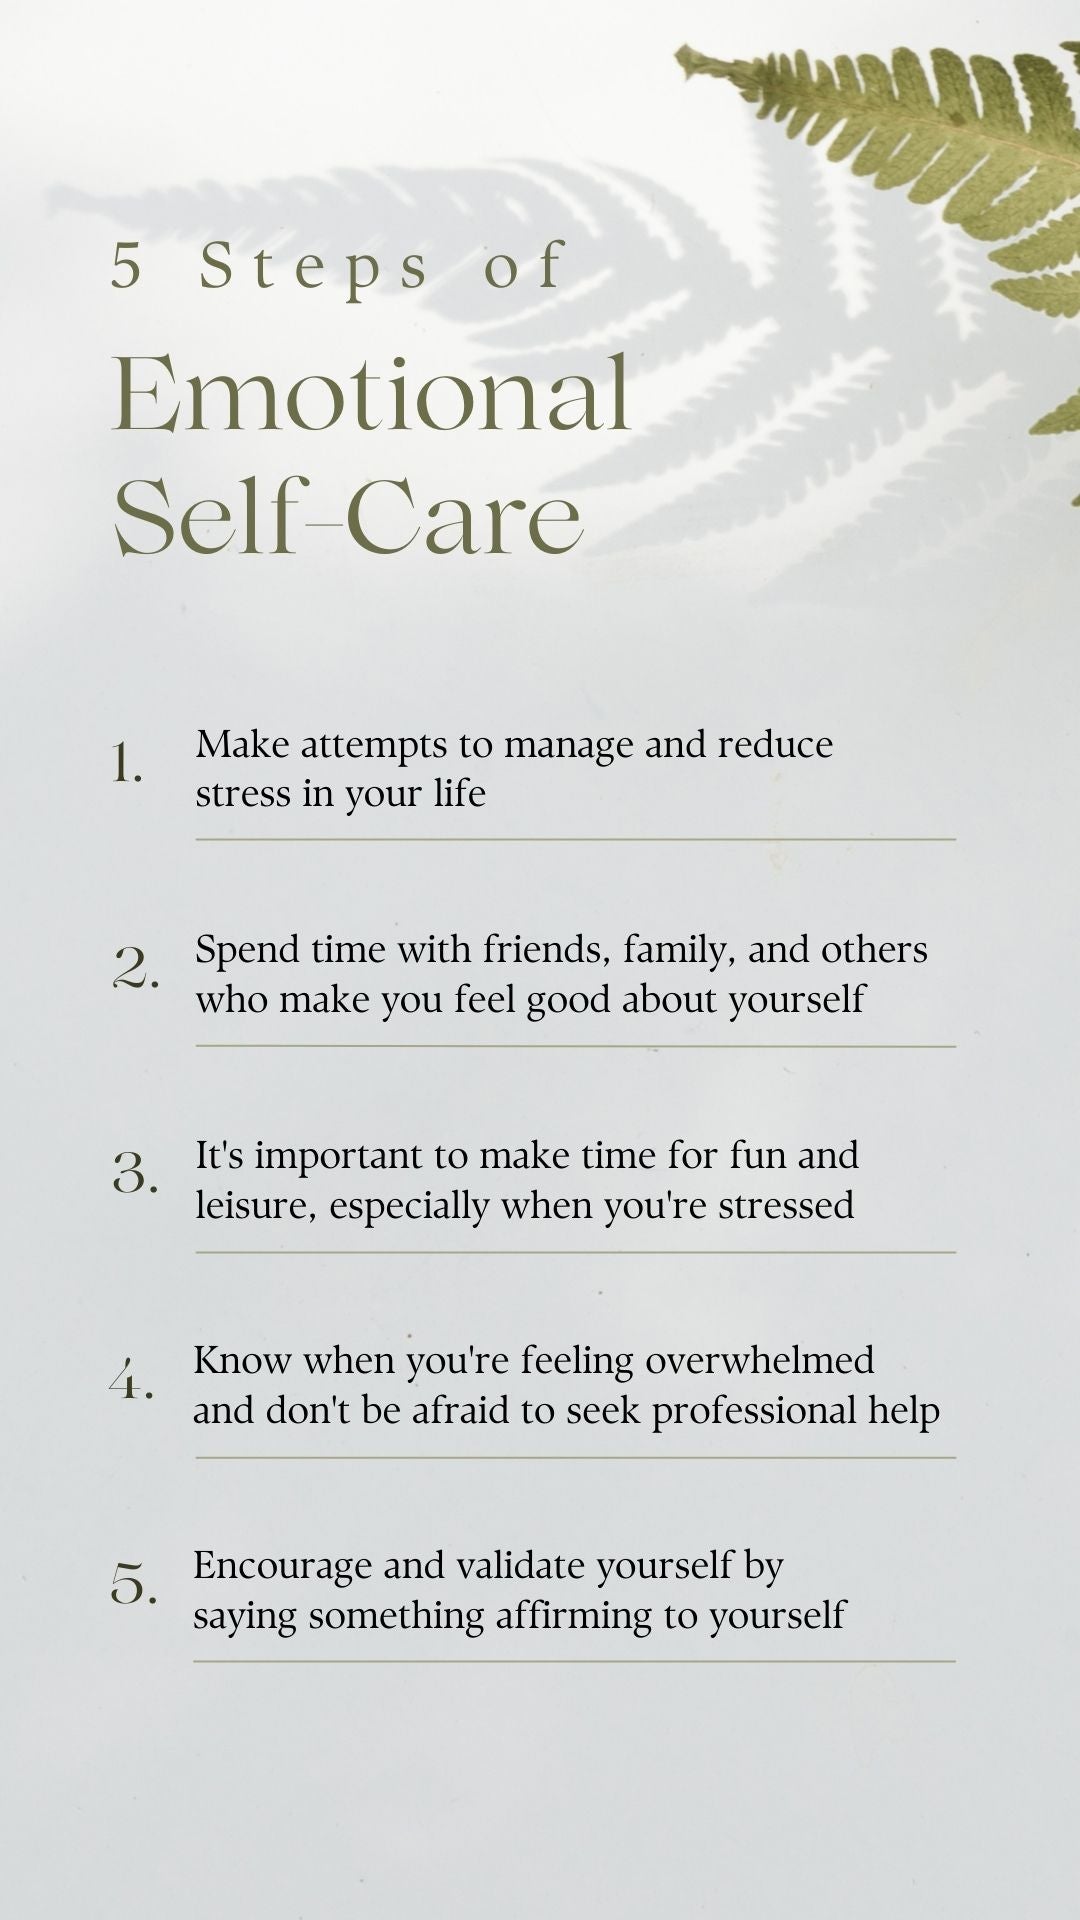 5 Tips for Emotional Self-care